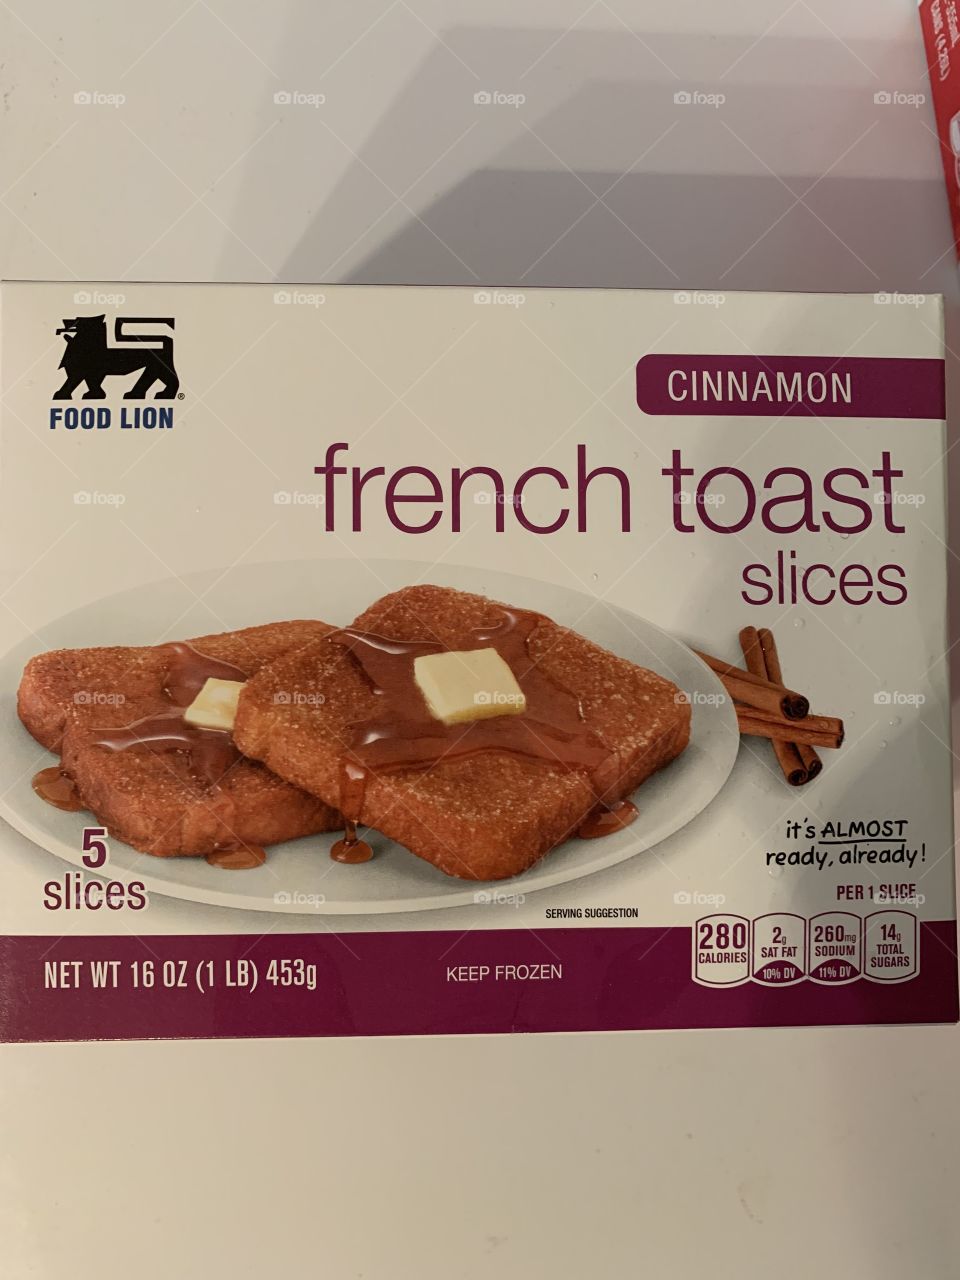 IT’S NICE TO HAVE A CINNAMON FRENCH TOAST SLICE! 